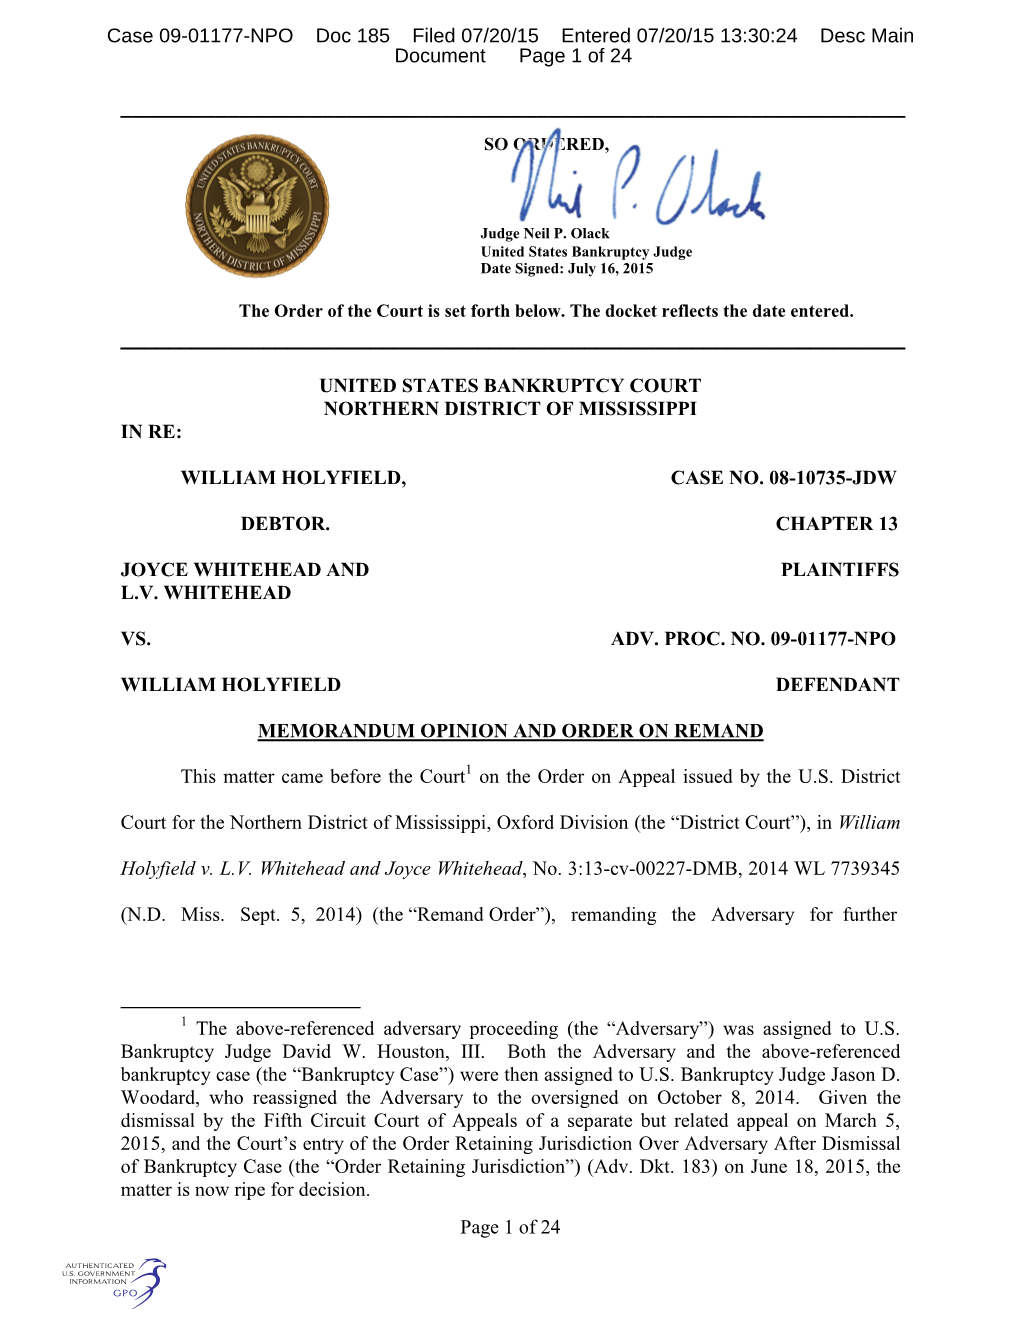 Page 1 of 24 UNITED STATES BANKRUPTCY COURT